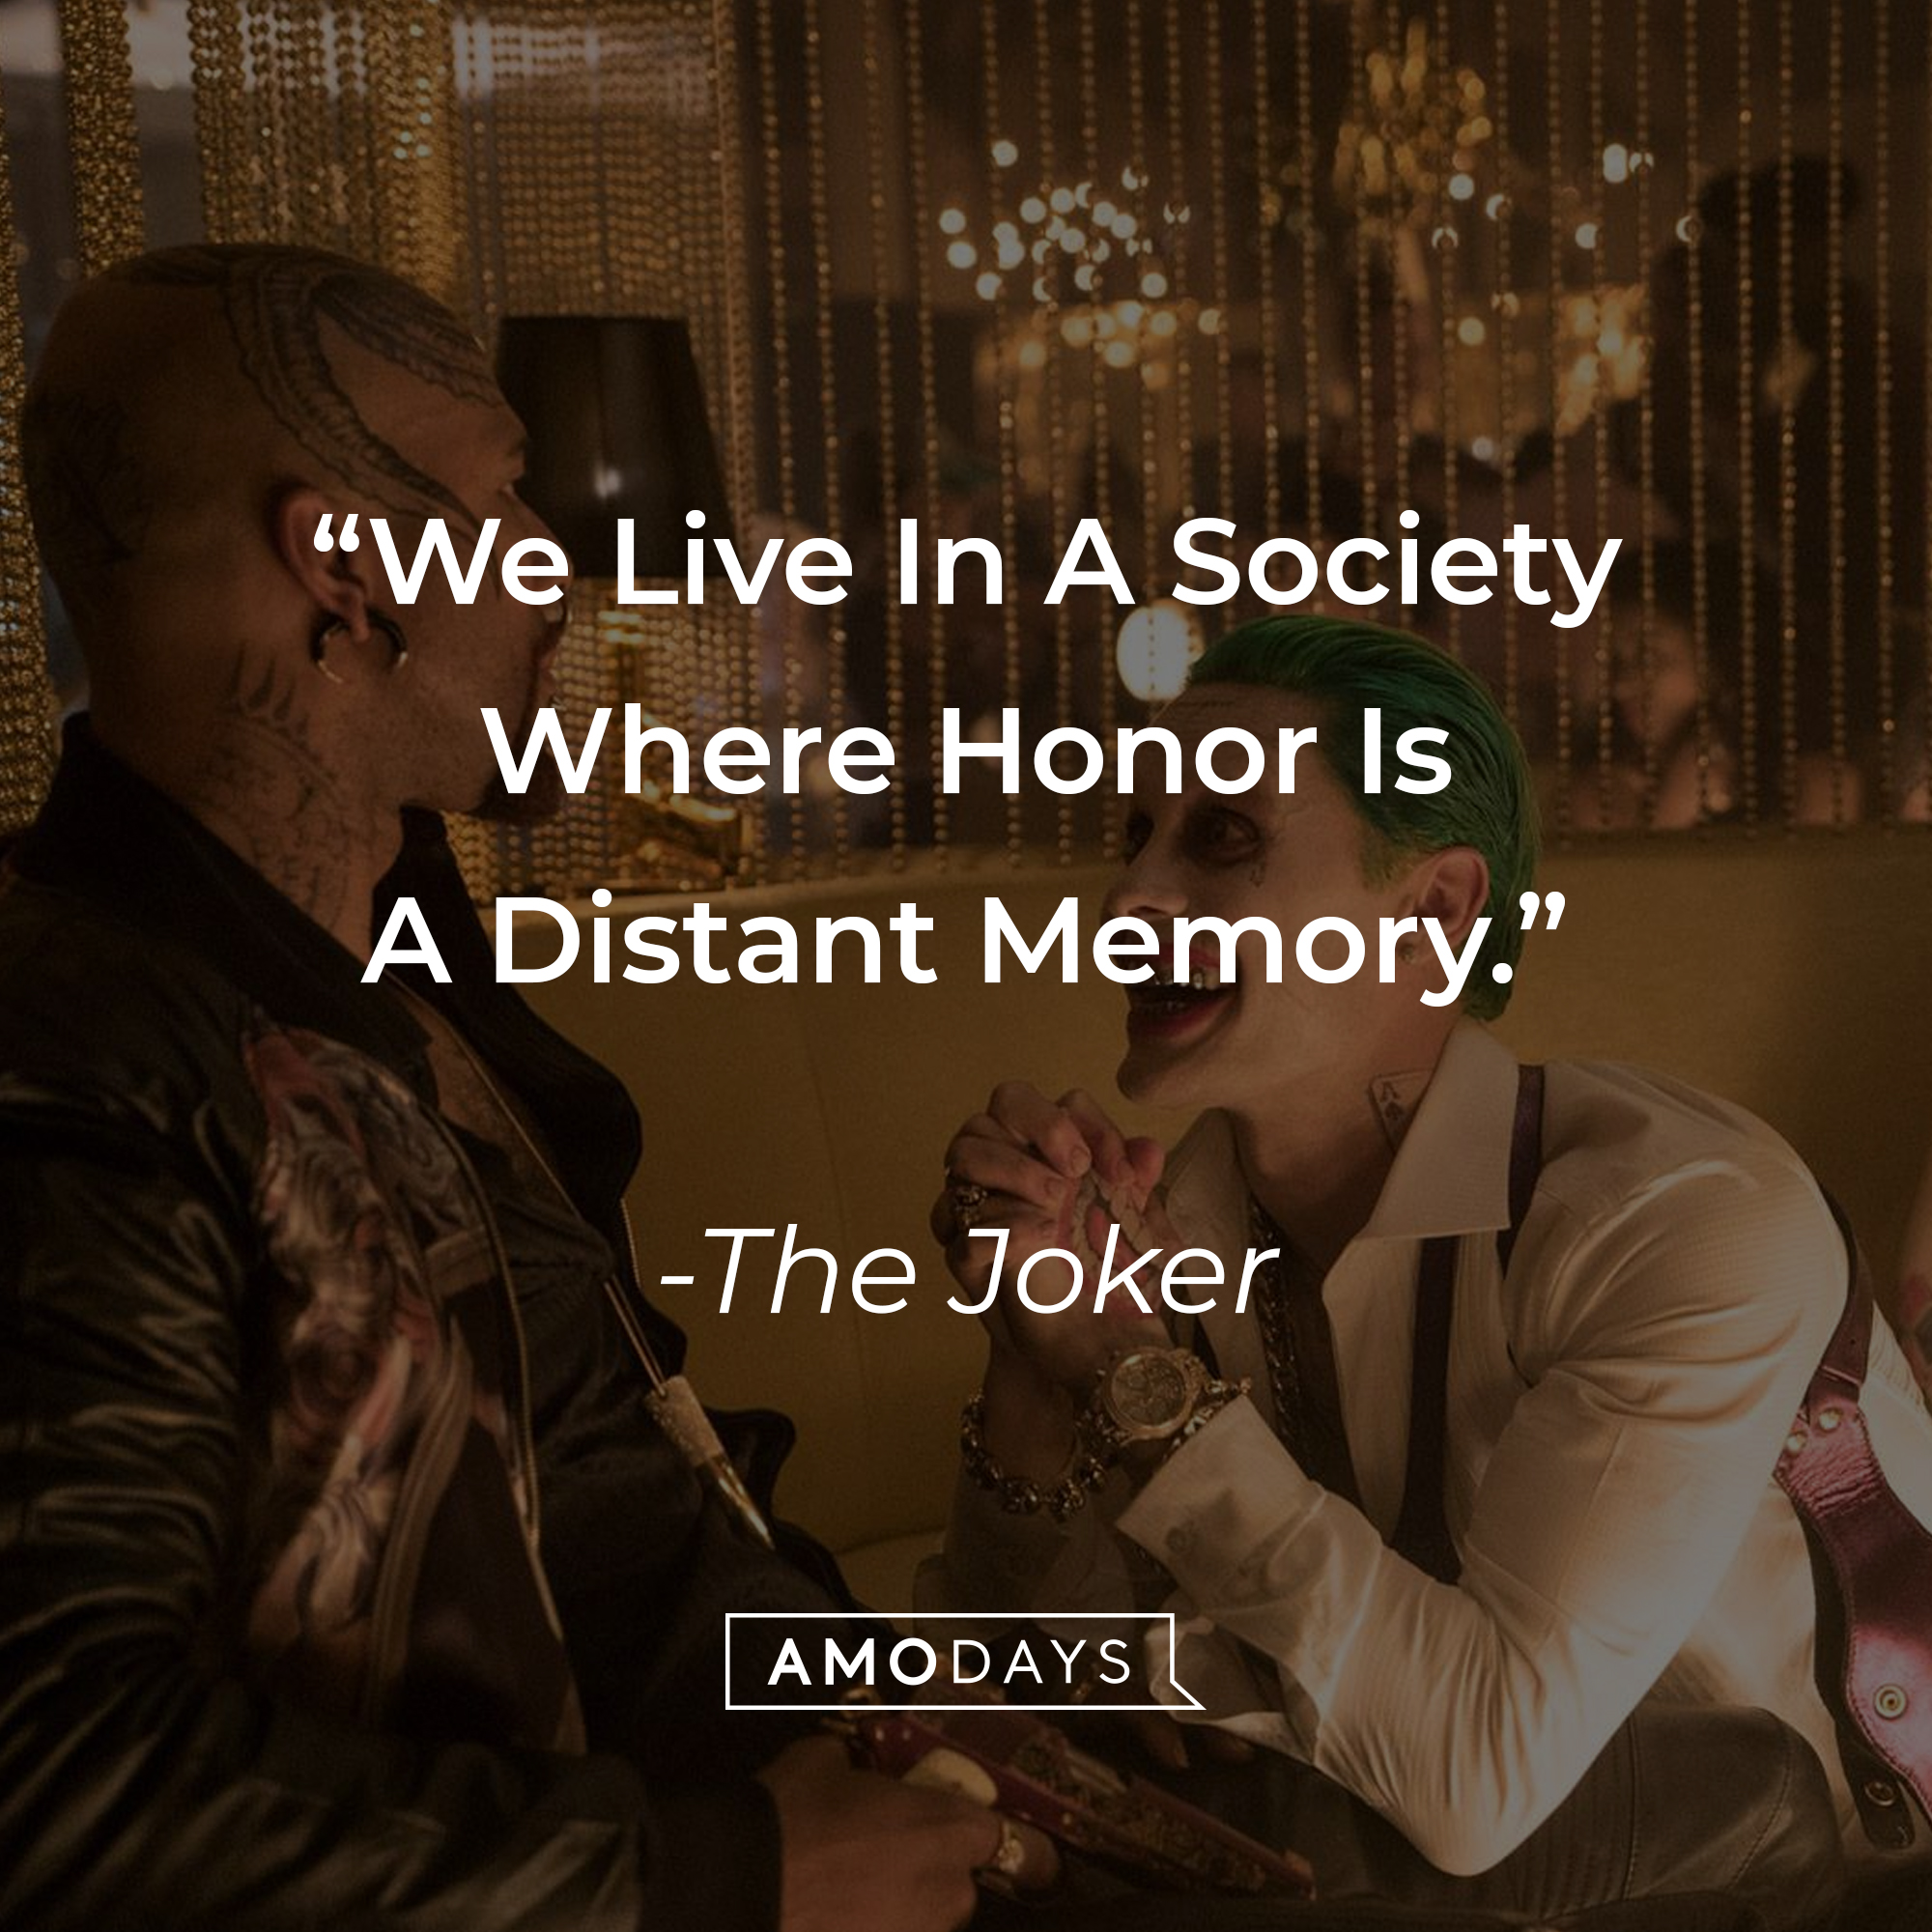 The Joker's quote: "We Live In A Society Where Honor Is A Distant Memory." | Source: facebook.com/thesuicidesquad